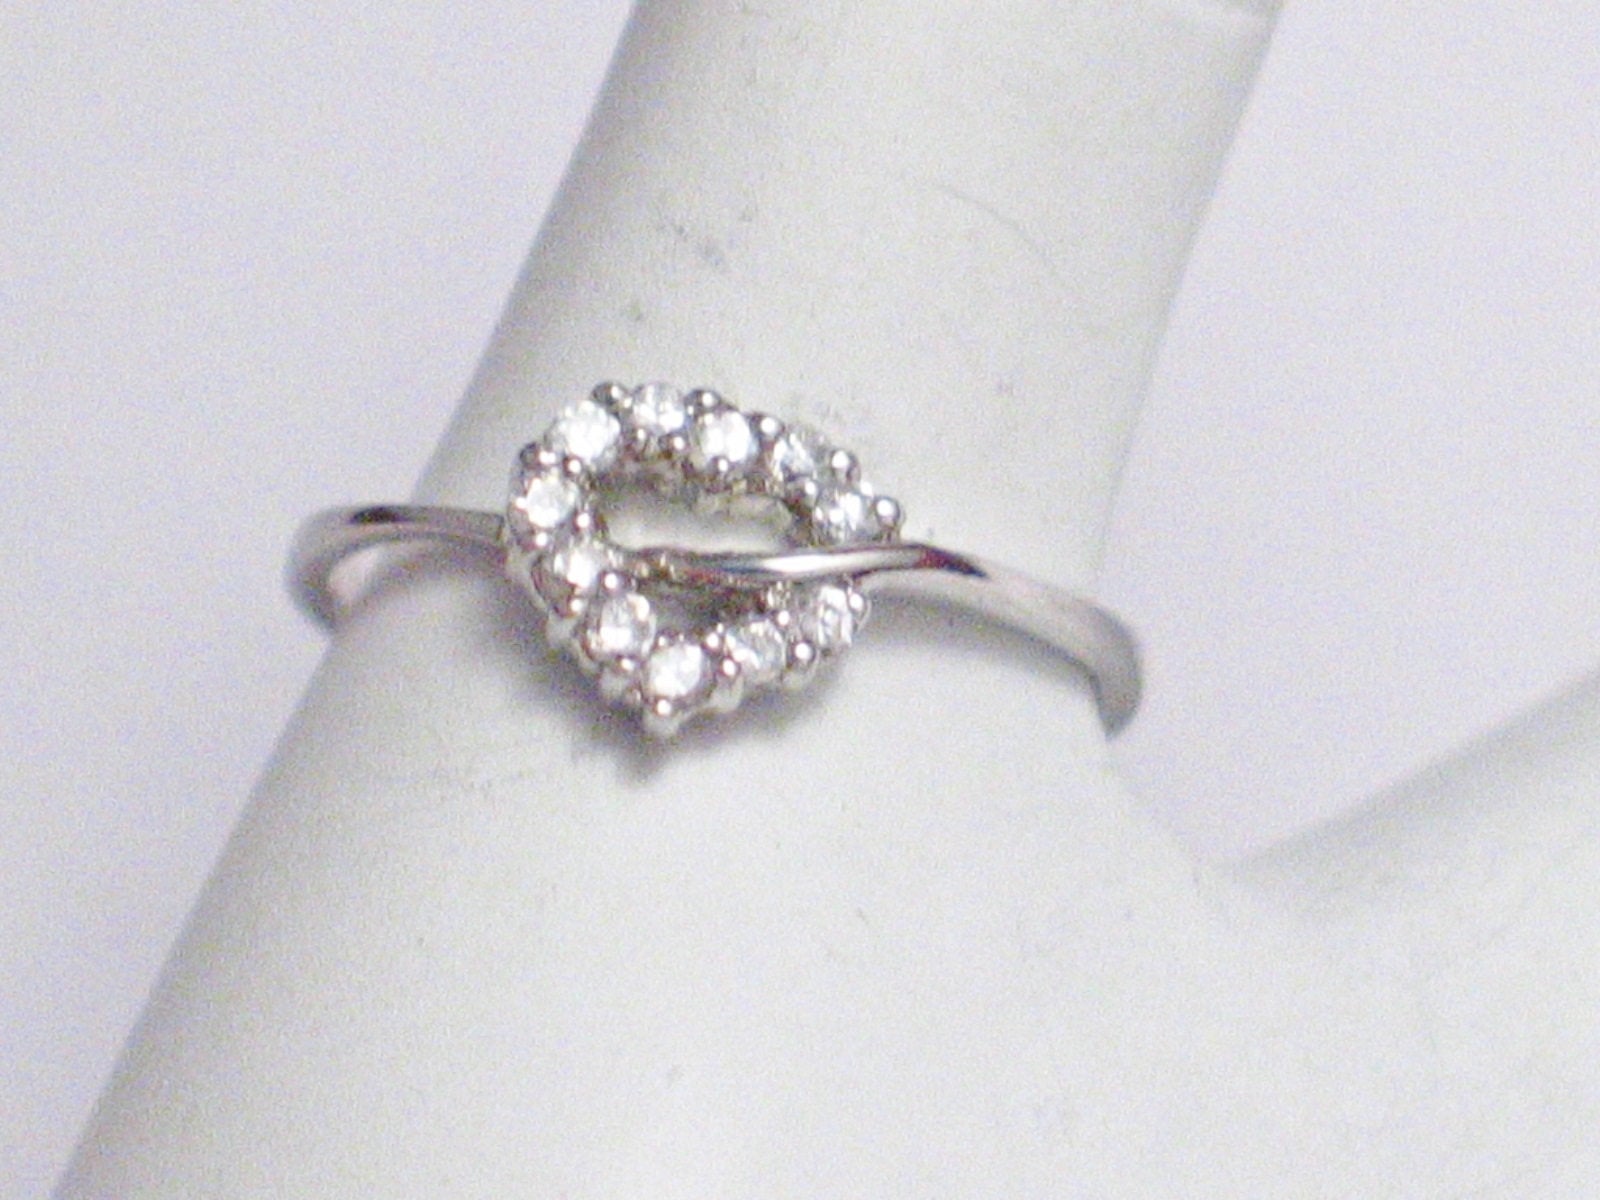 Thin Ring, sz6 Dainty Style White CZ Stone Sterling Silver Heart Ring - Womens Jewelry